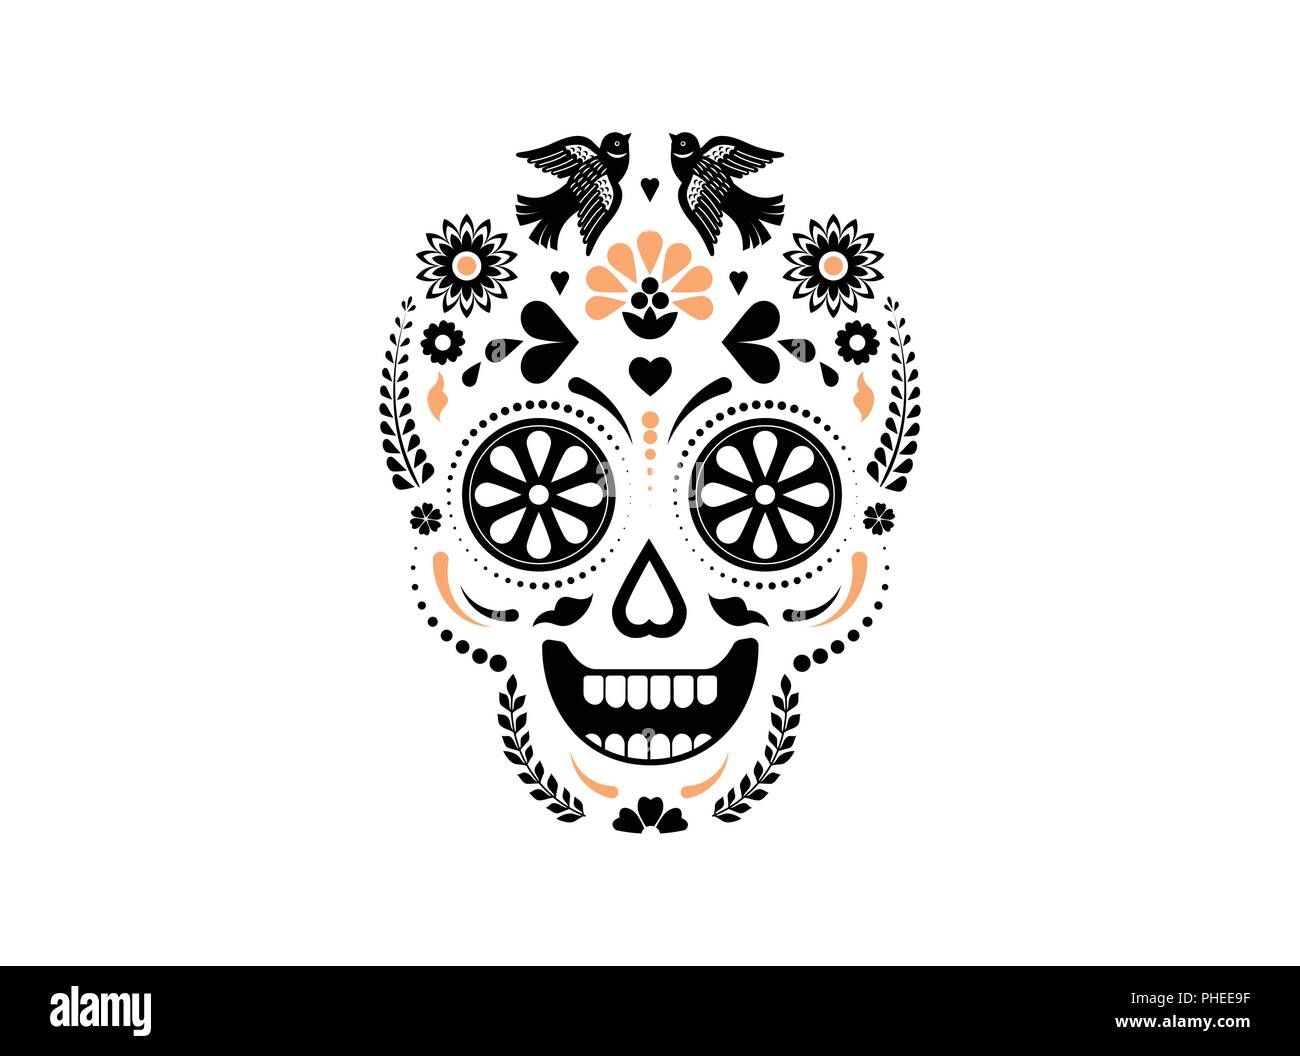 Day of the dead, Dia de los muertos background, banner and greeting card concept with sugar skull. Colorful vector illustration Stock Vector